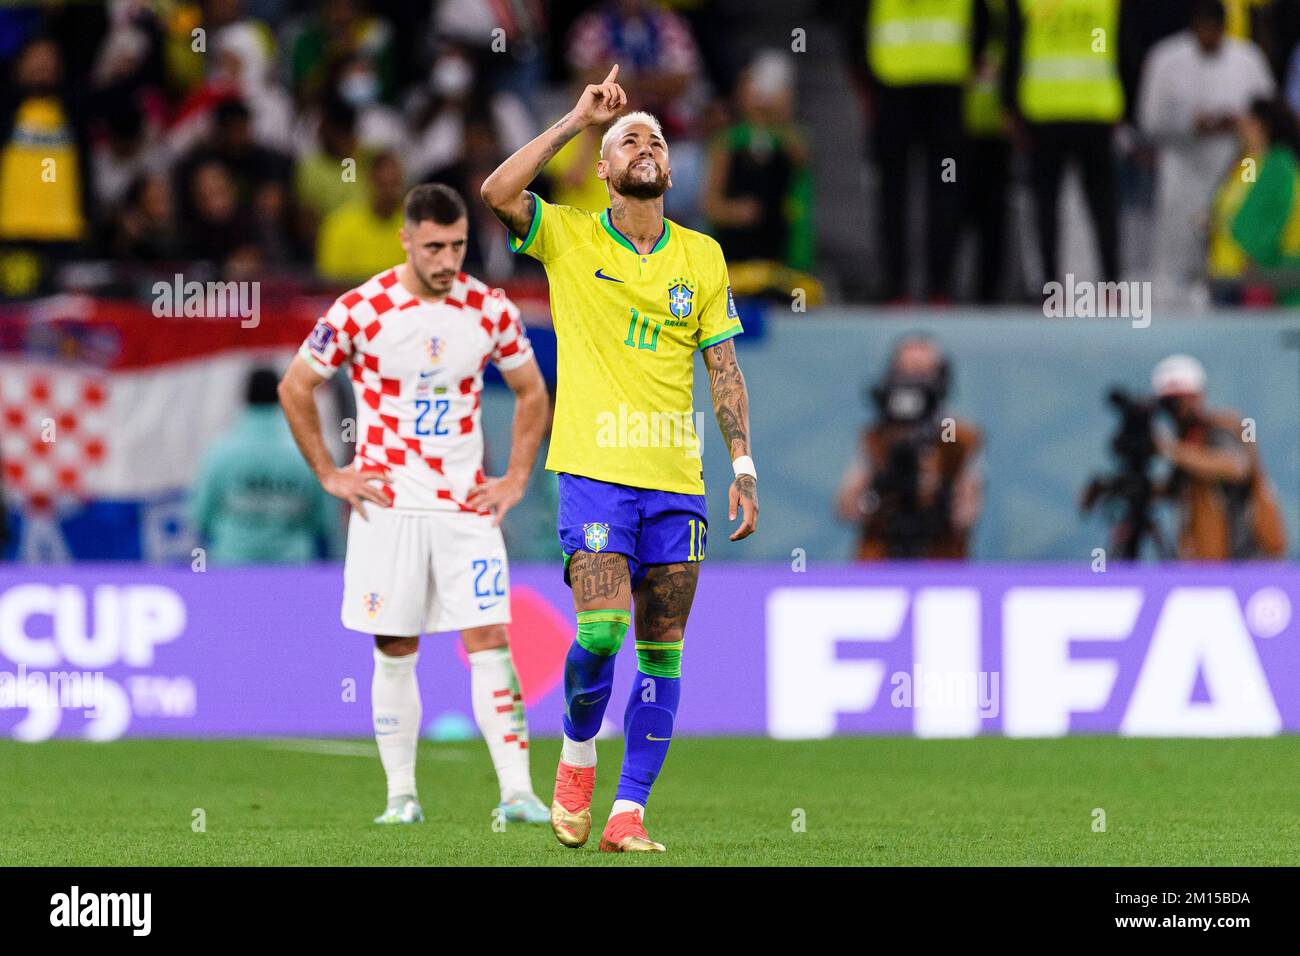 Doha, Qatar. 09th Dec, 2022. Education City Stadium Neymar of Brazil celebrates after scoring a goal (0-1) during the match between Croatia and Brazil, valid for the quarterfinals of the World Cup, held at the Education City Stadium in Doha, Qatar. (Marcio Machado/SPP) Credit: SPP Sport Press Photo. /Alamy Live News Stock Photo